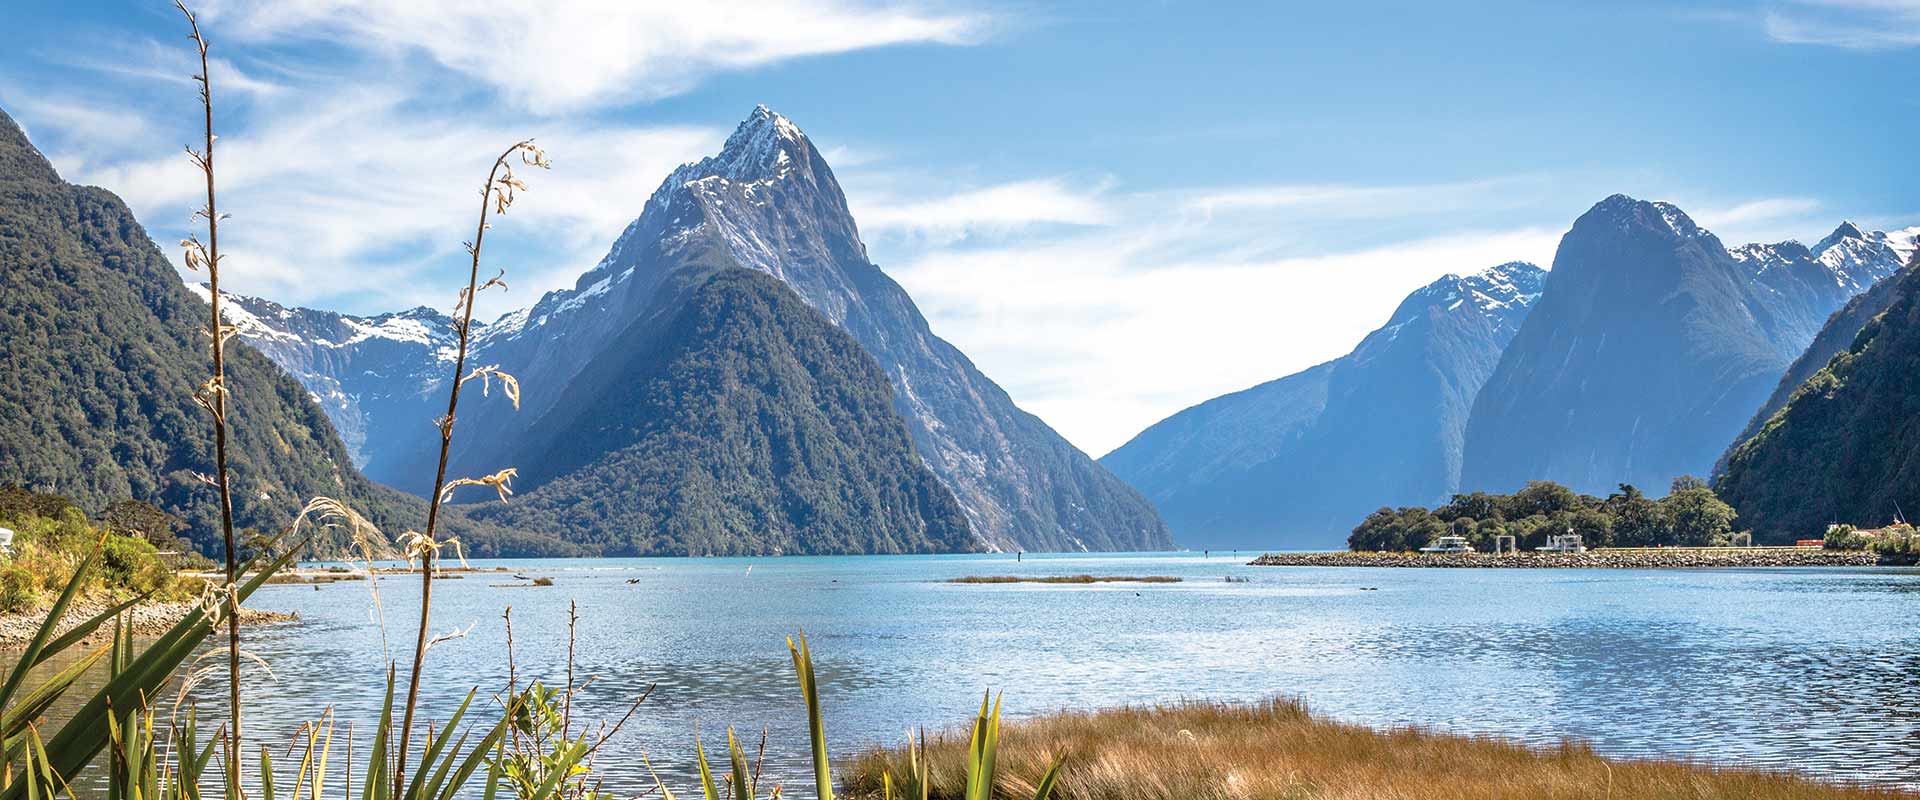 Panoramic view of Milford Sound, South Island, New Zealand